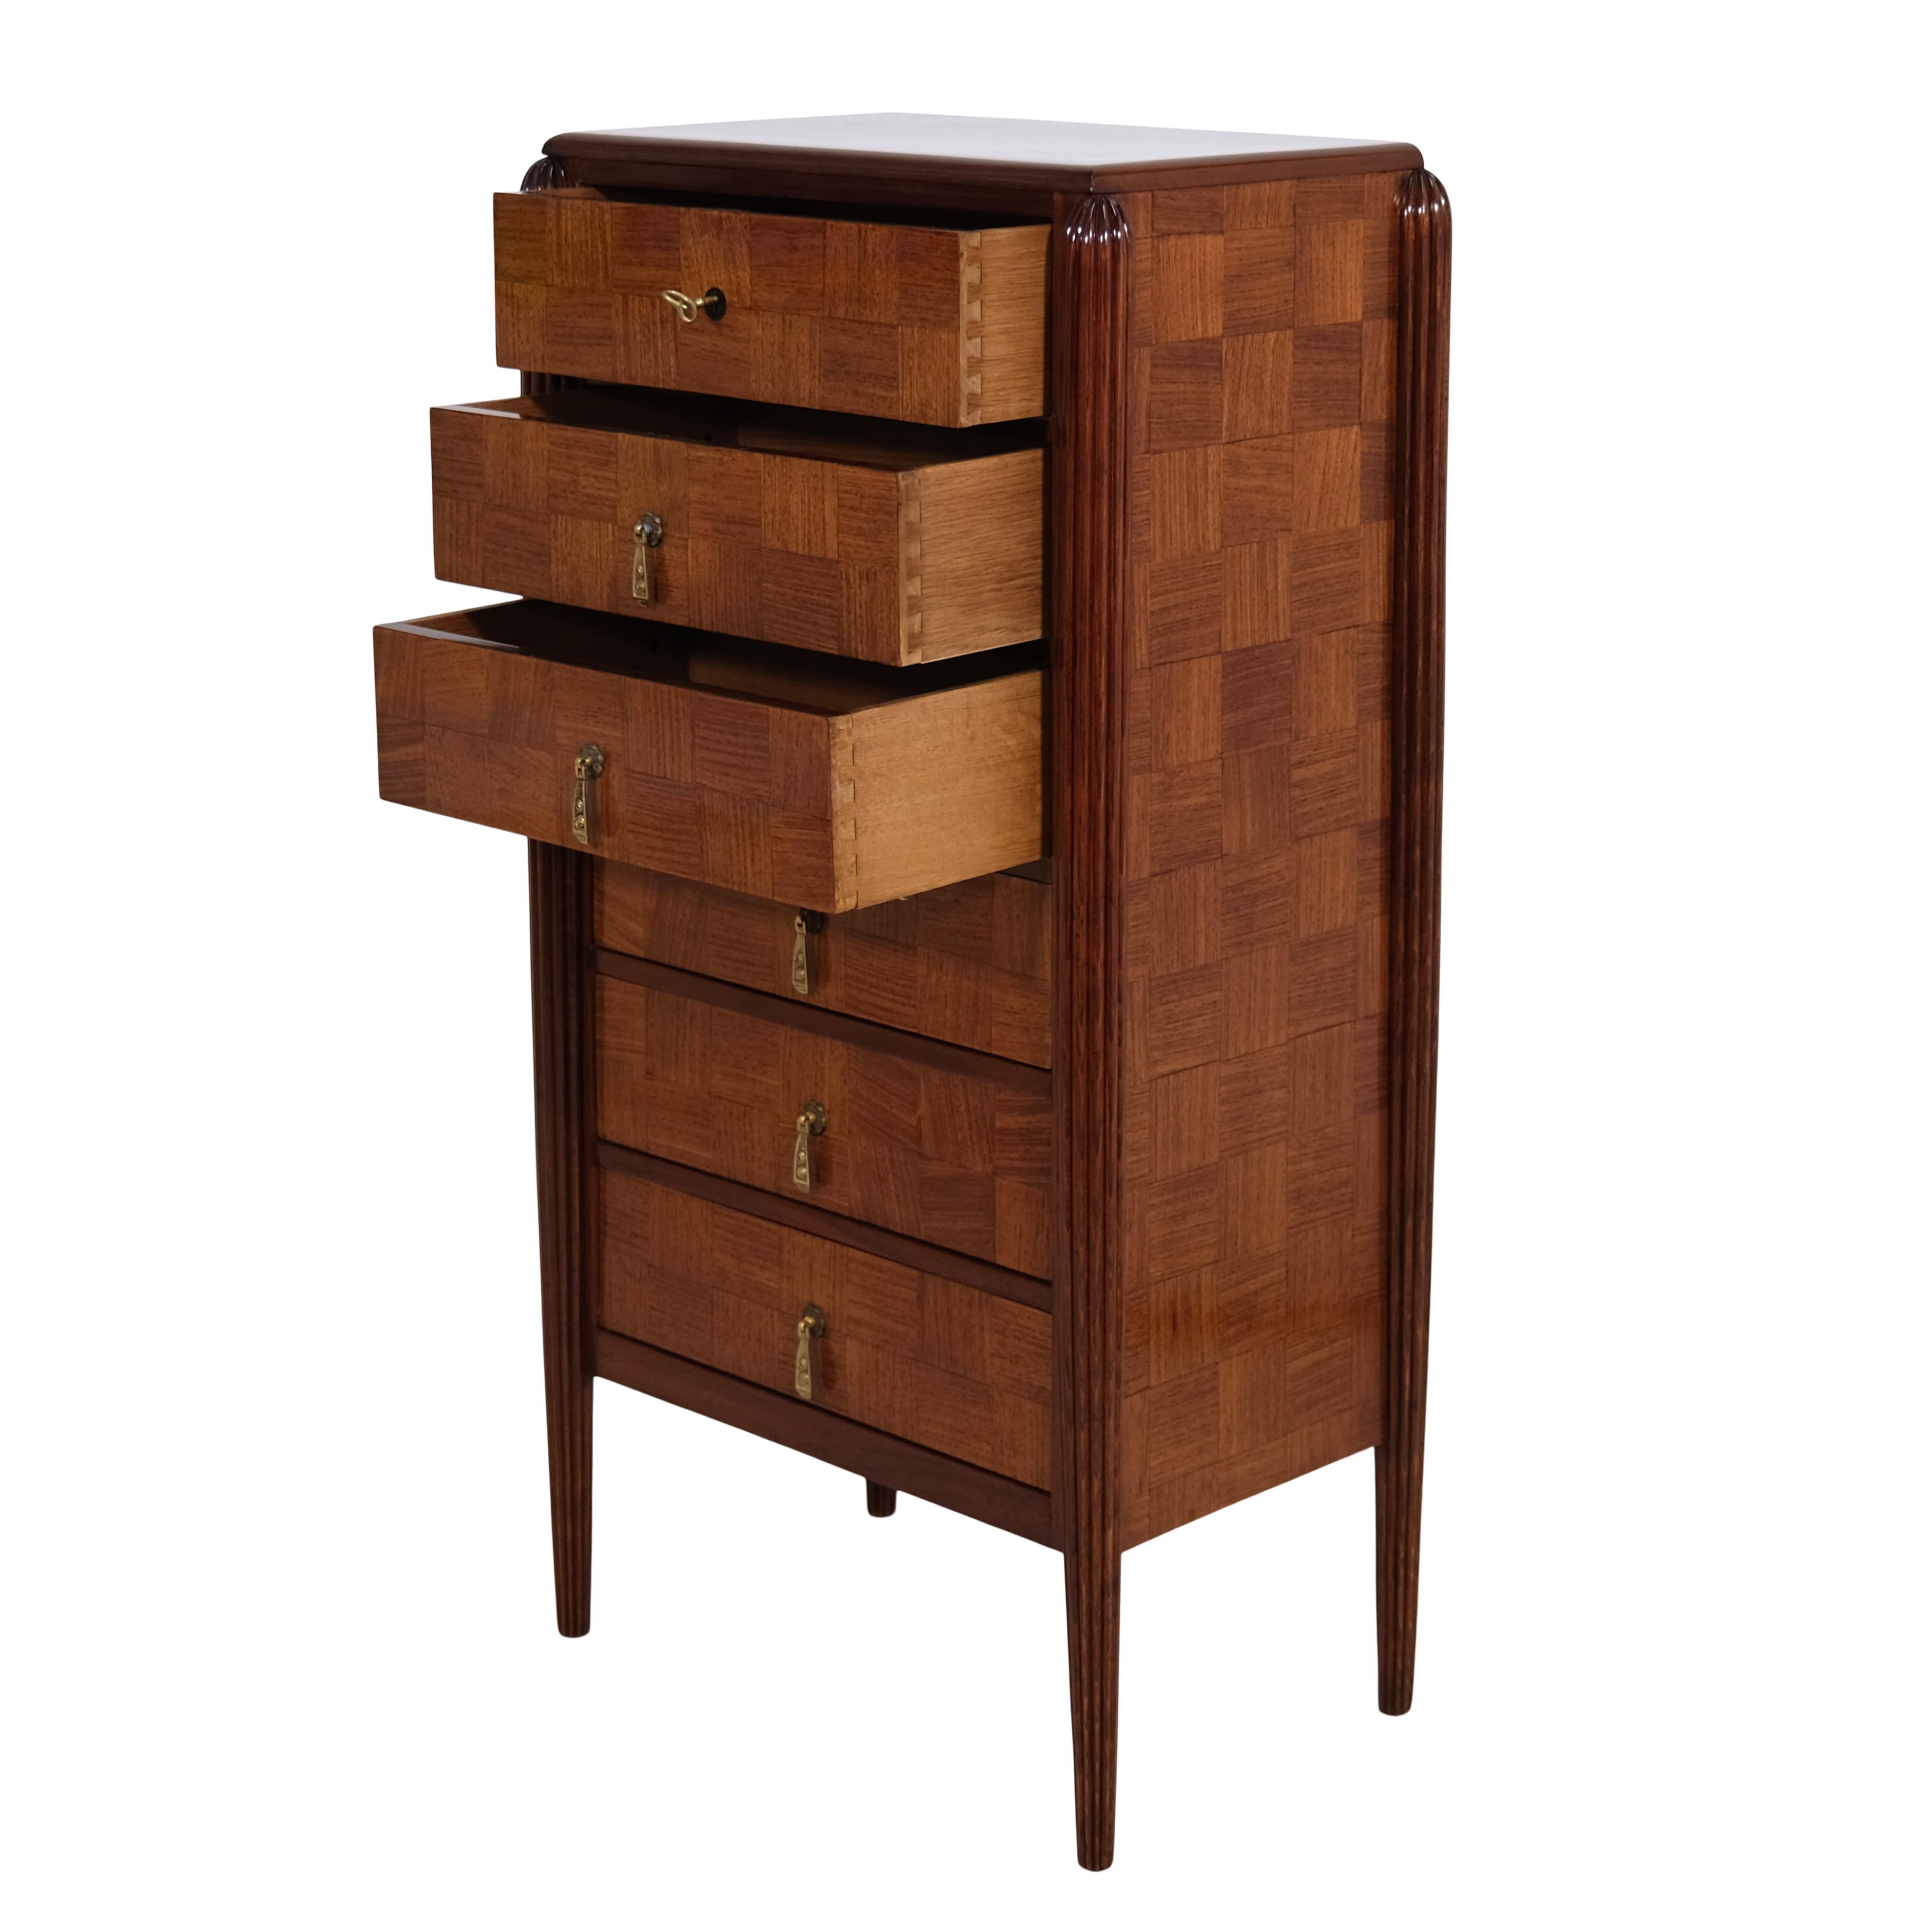 Mahogany Early French Art Deco High Chest Of Drawers With Six Drawers For Sale